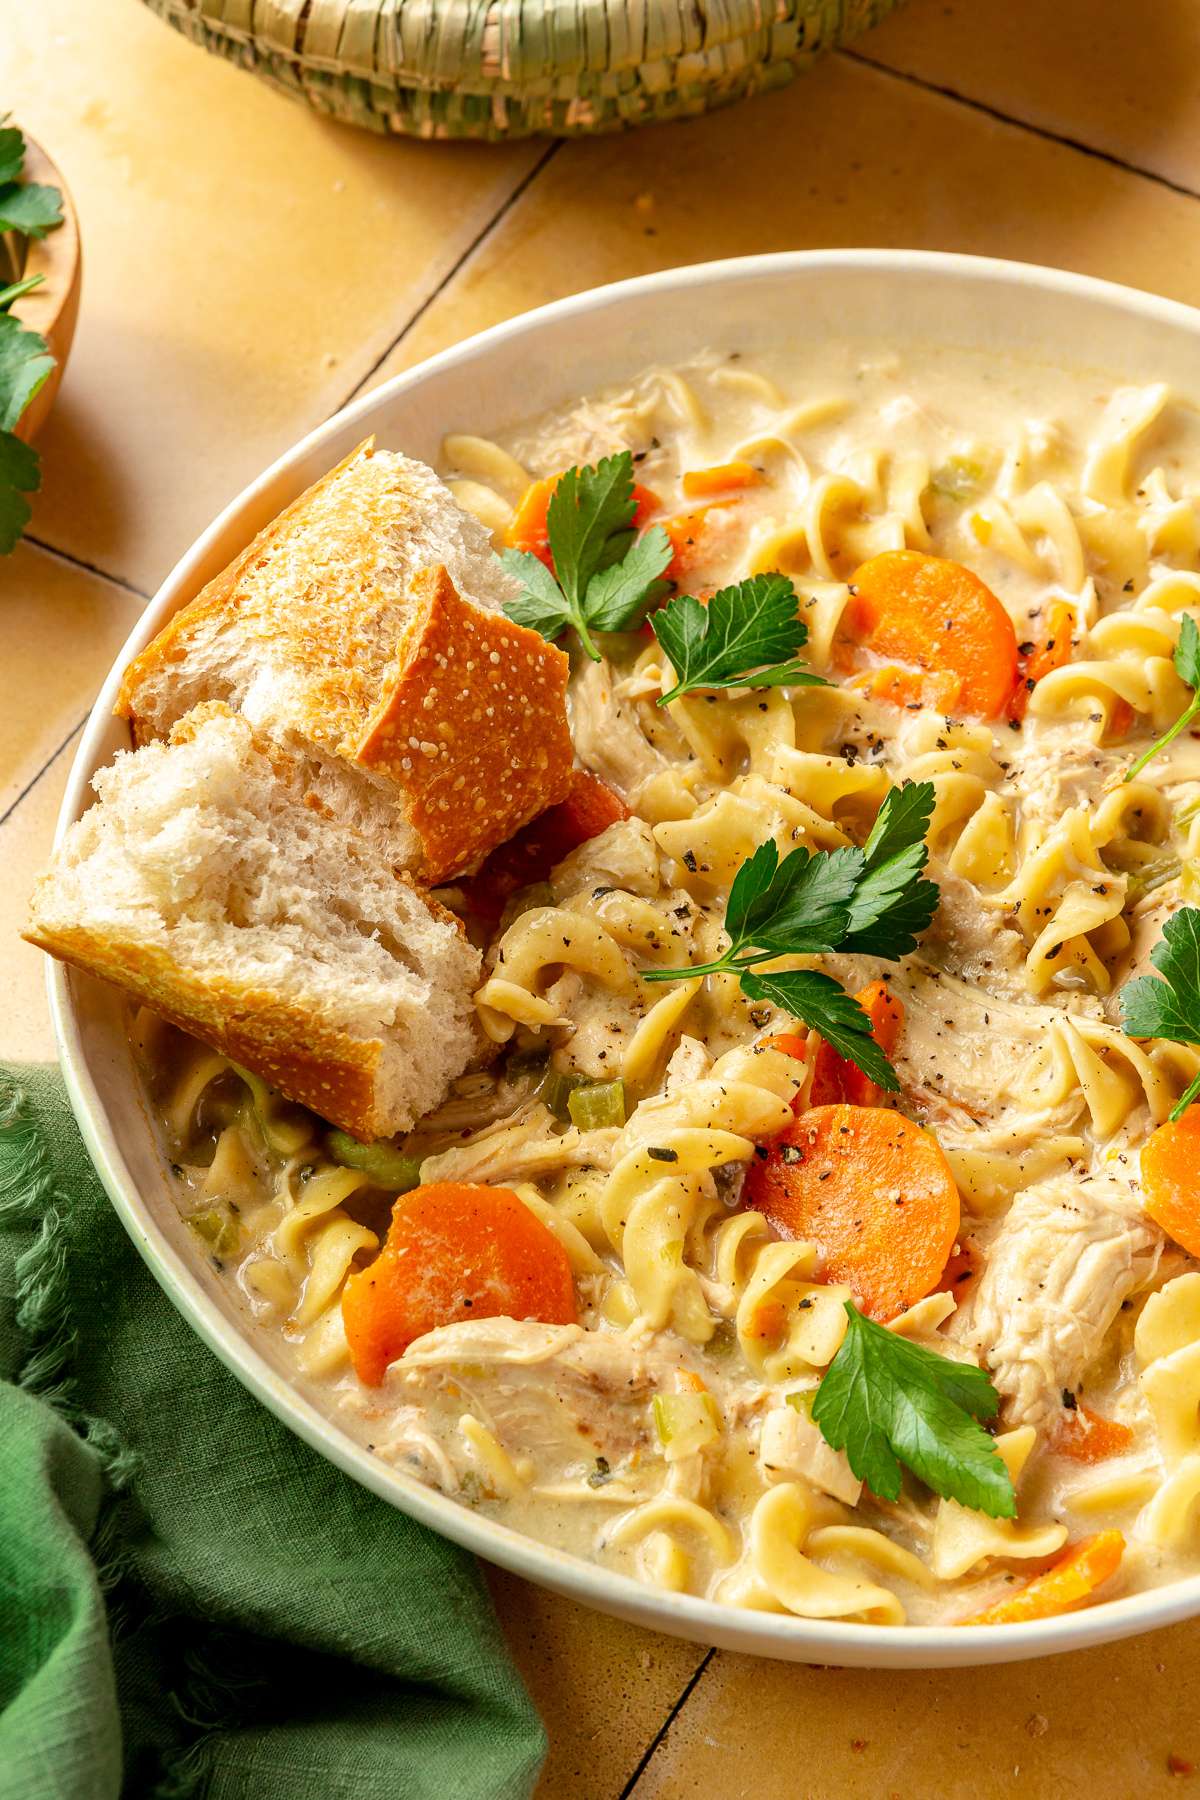 Soup with noodles, carrots and chicken served with bread.